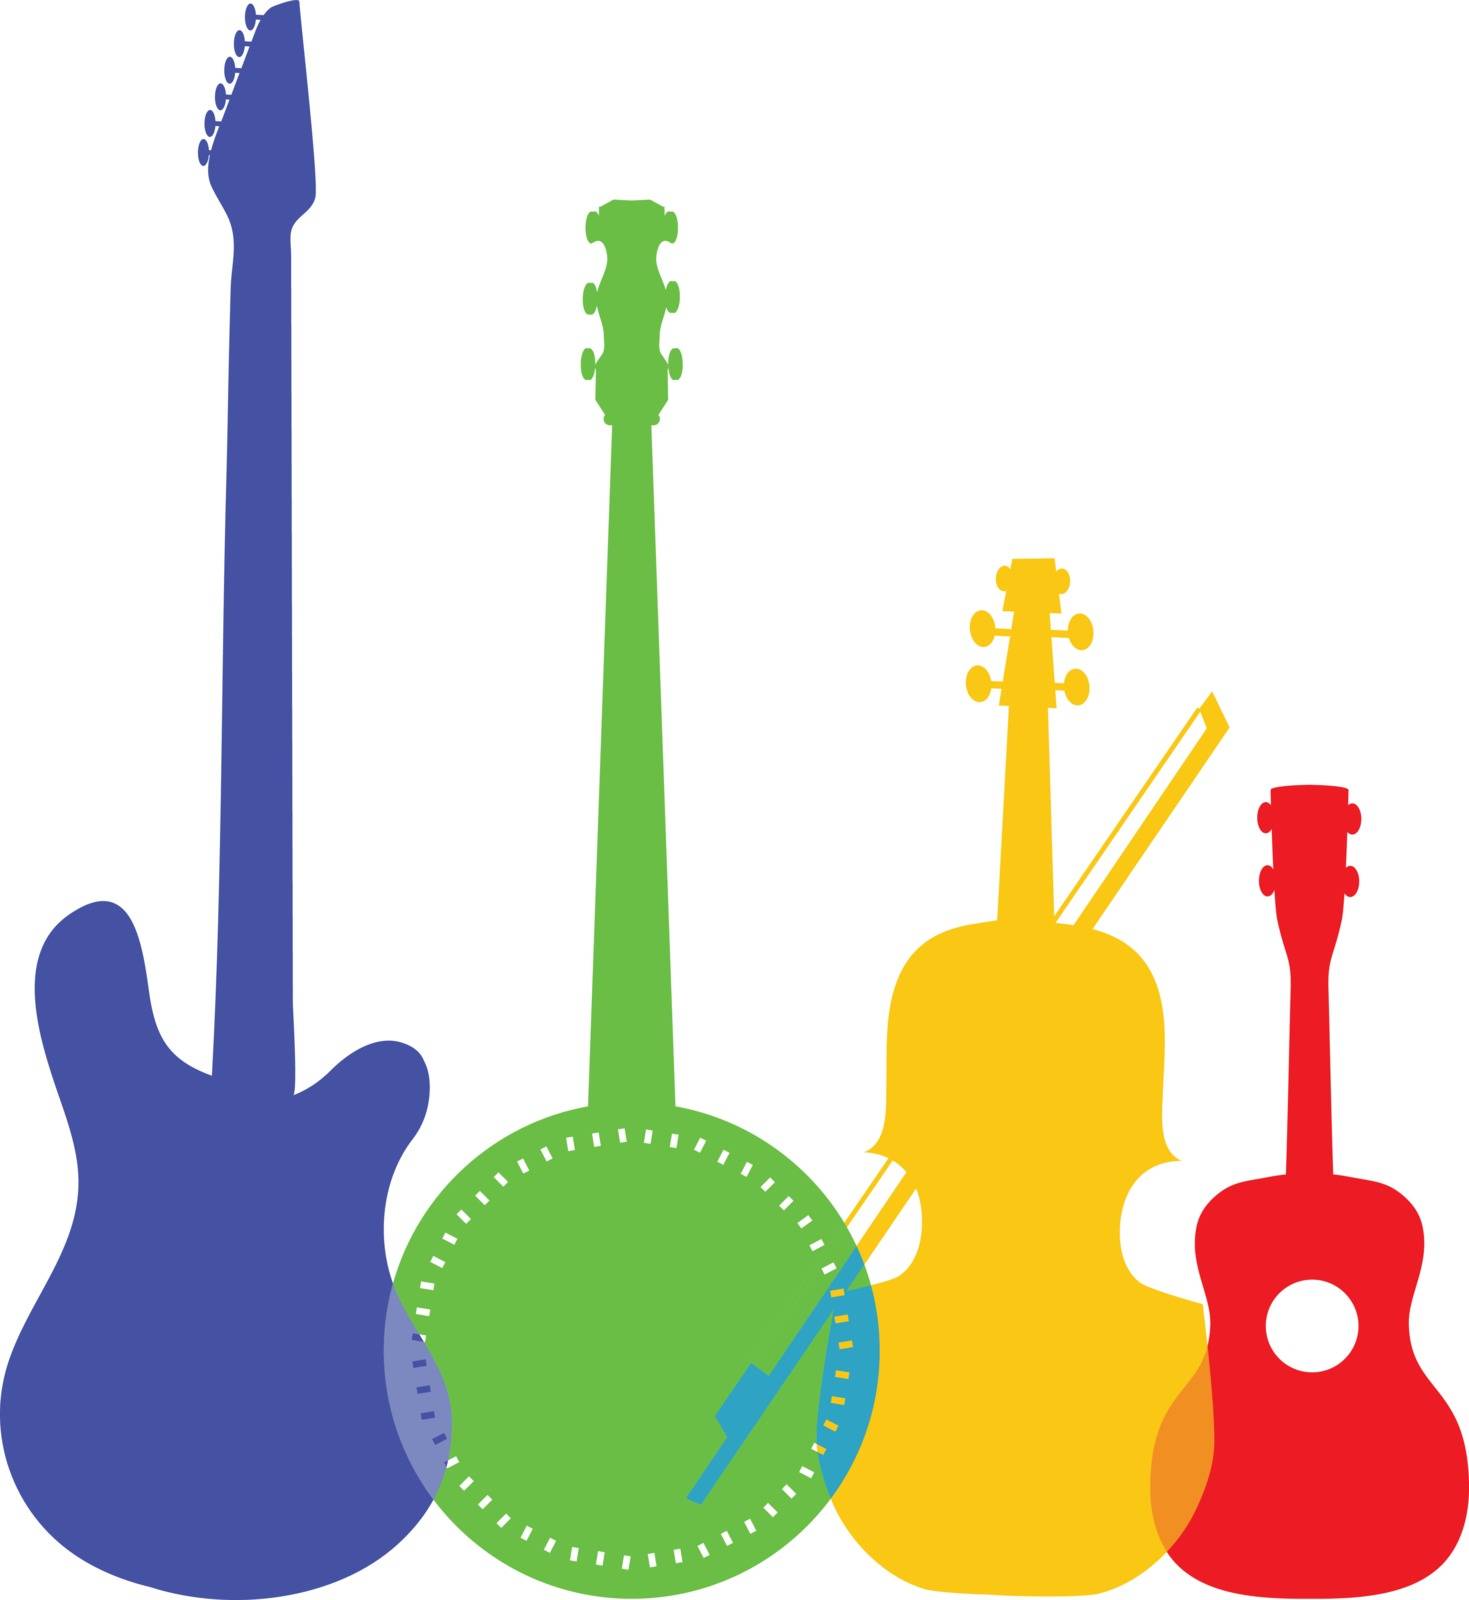 A group of silhouetted and colorful stringed instruments including an electric guitar, a banjo, a violin and a ukulele